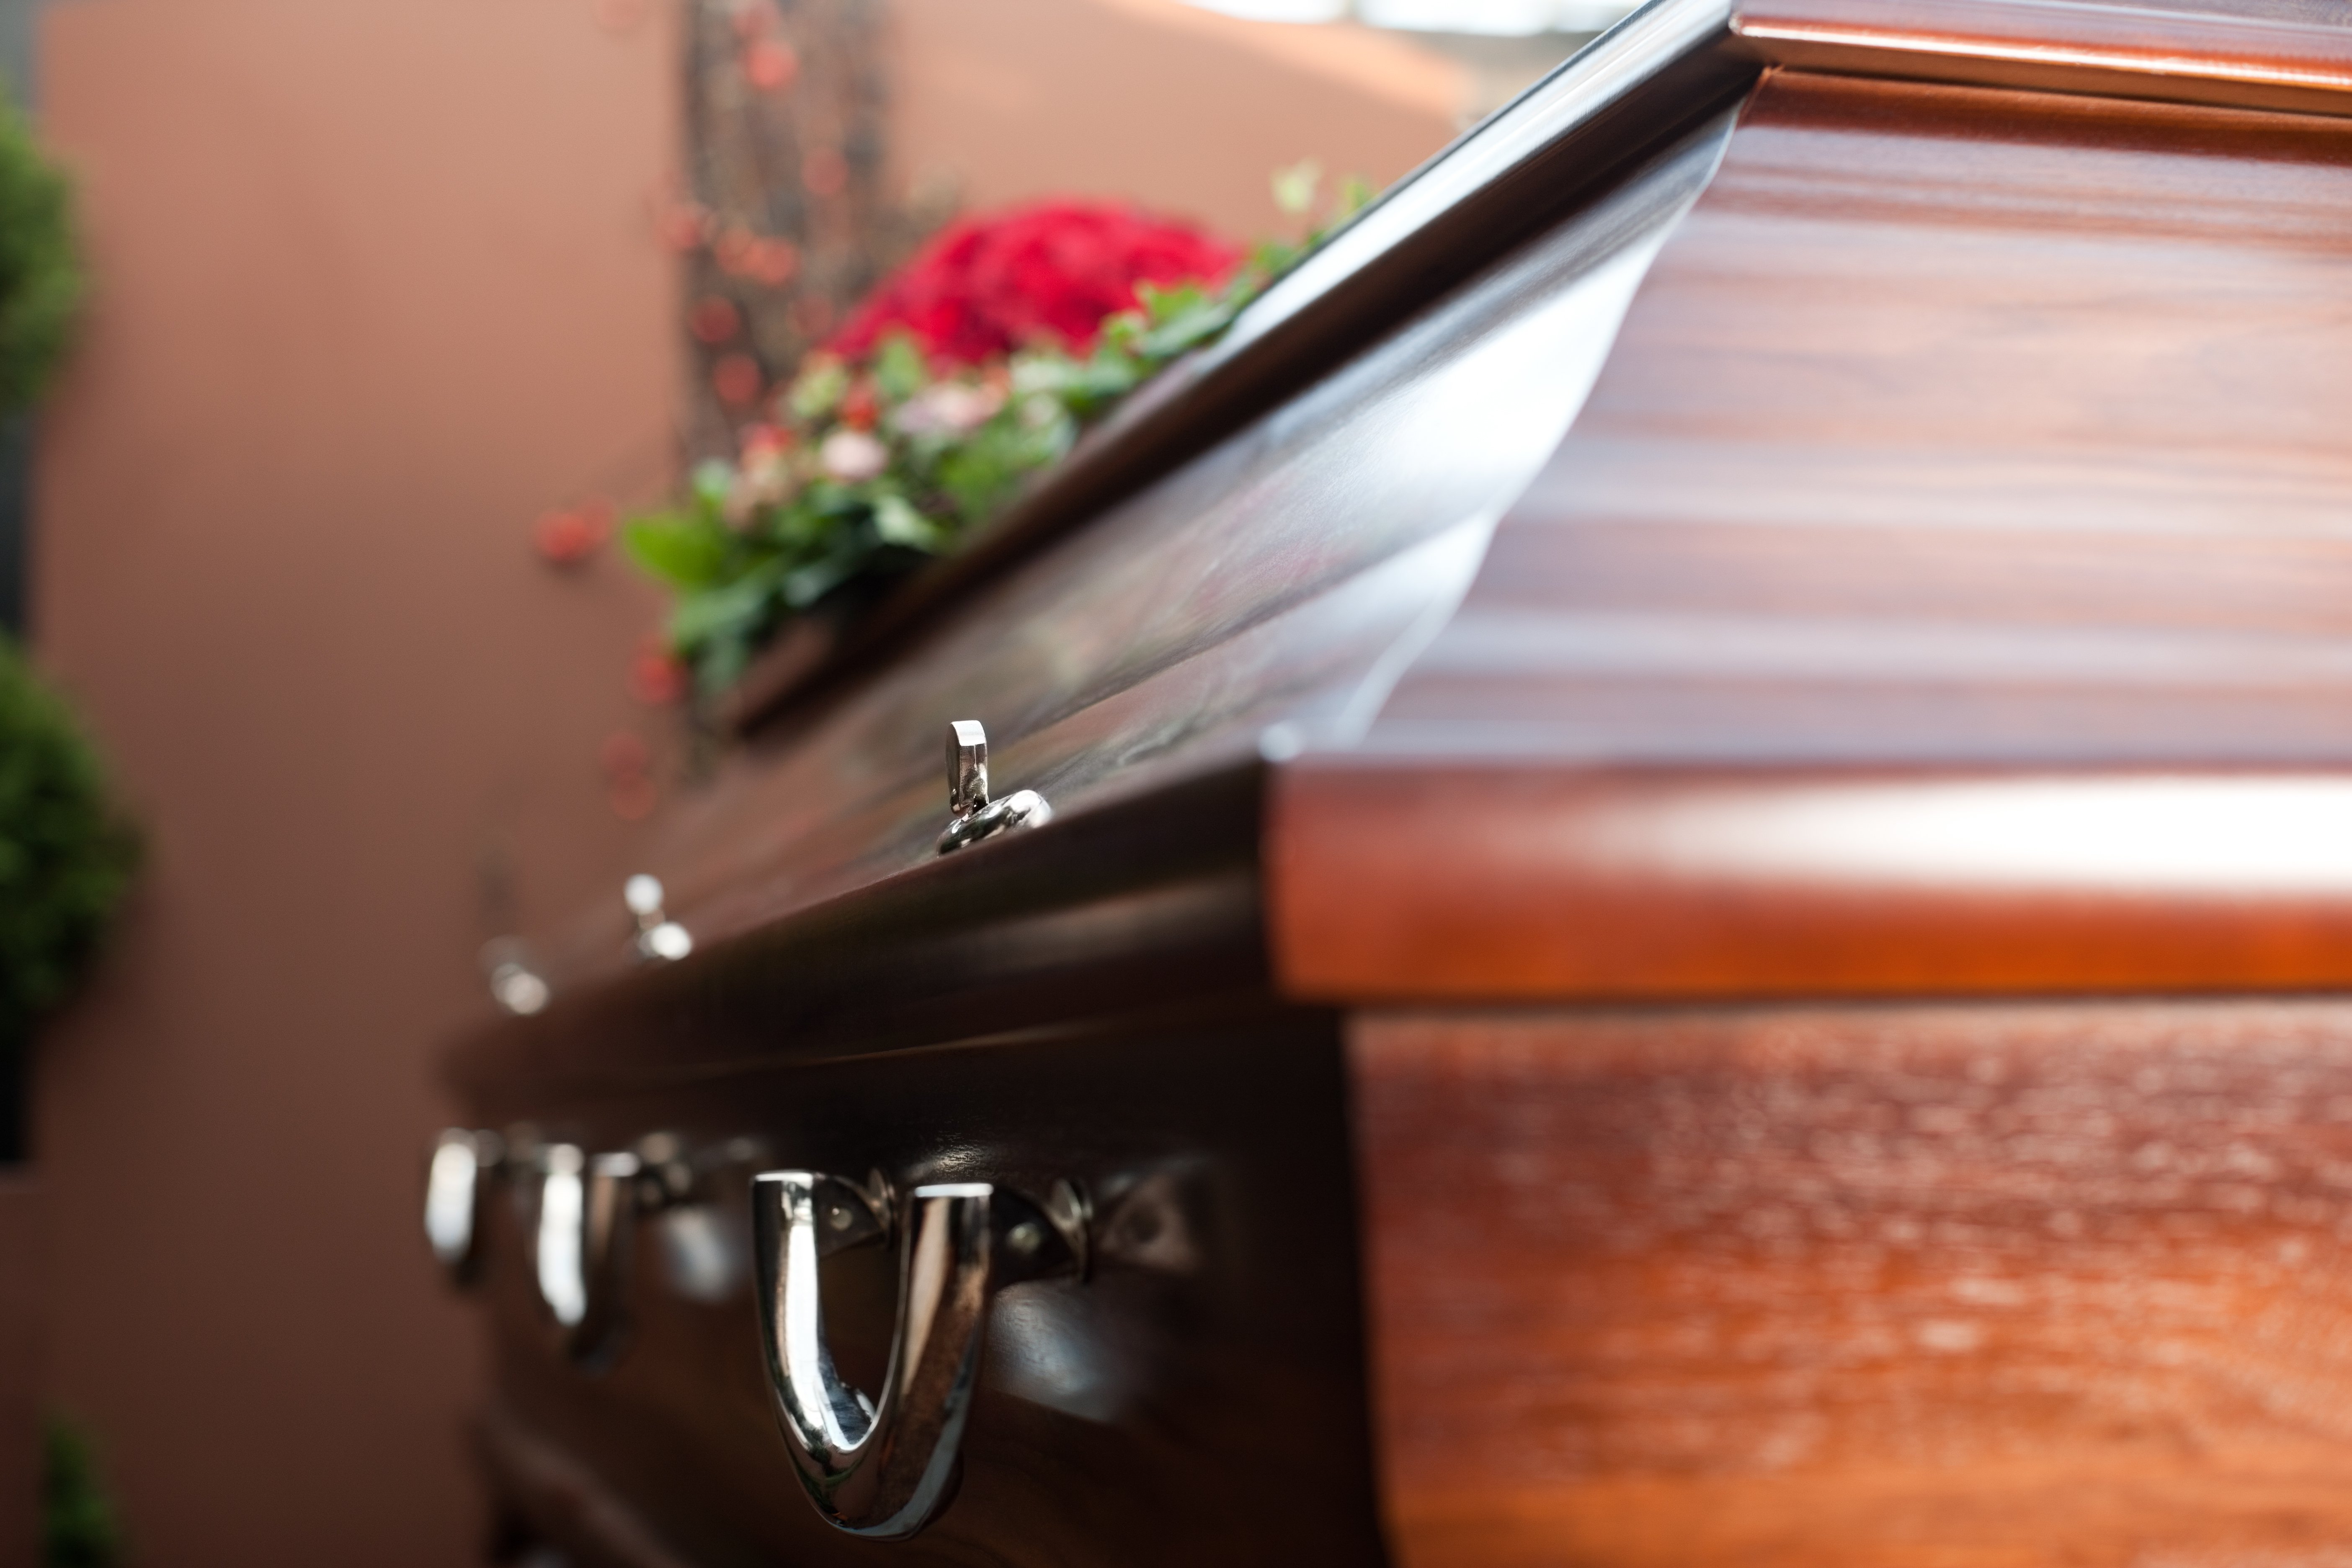 A coffin with red flowers on top. | Source: Shutterstock